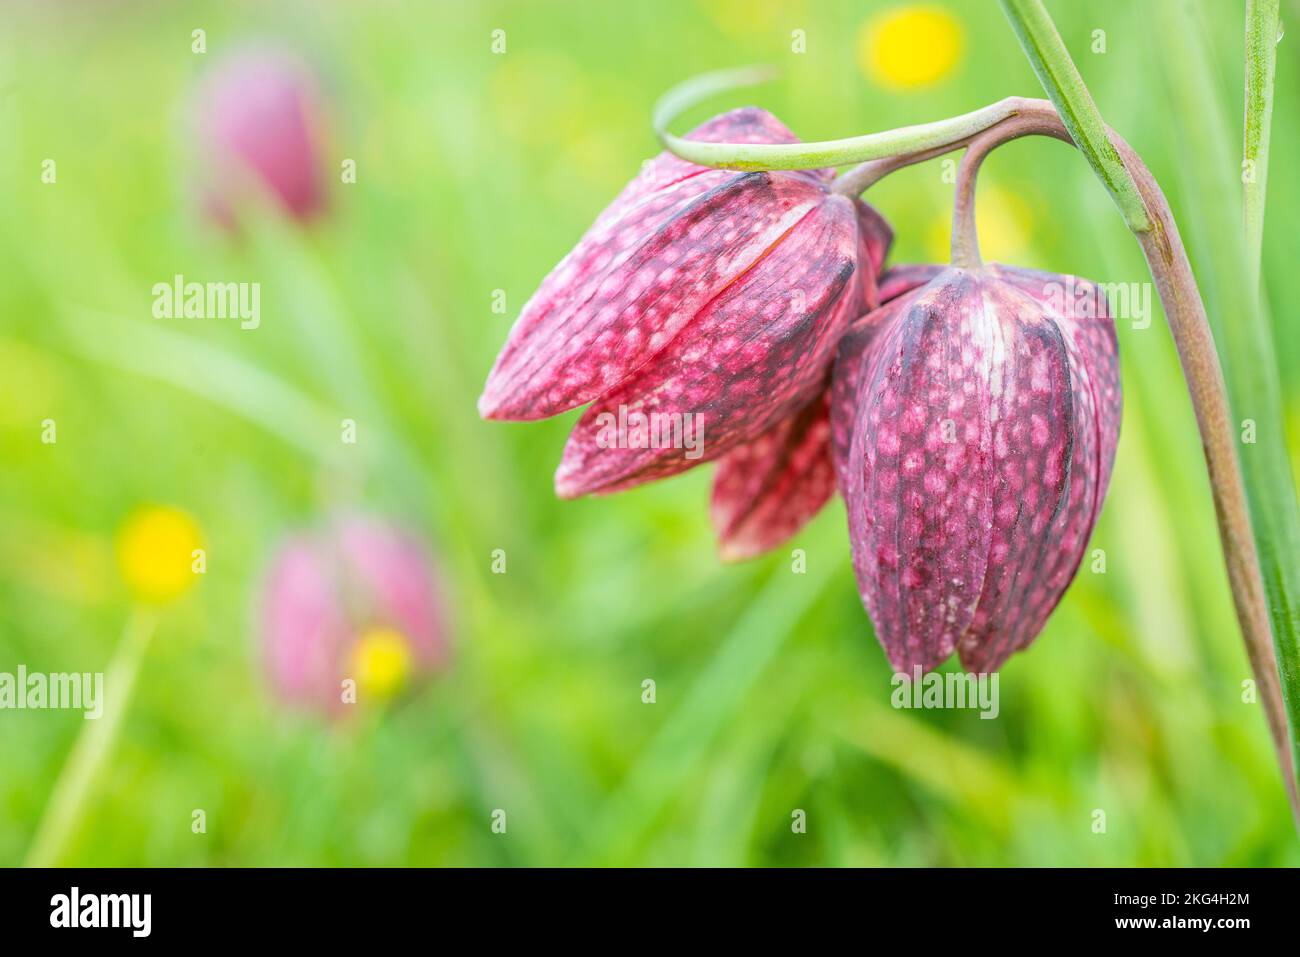 Fritillaria meleagris (snake's head fritillary) is a Eurasian species of flowering plant in the lily family Liliaceae. Stock Photo